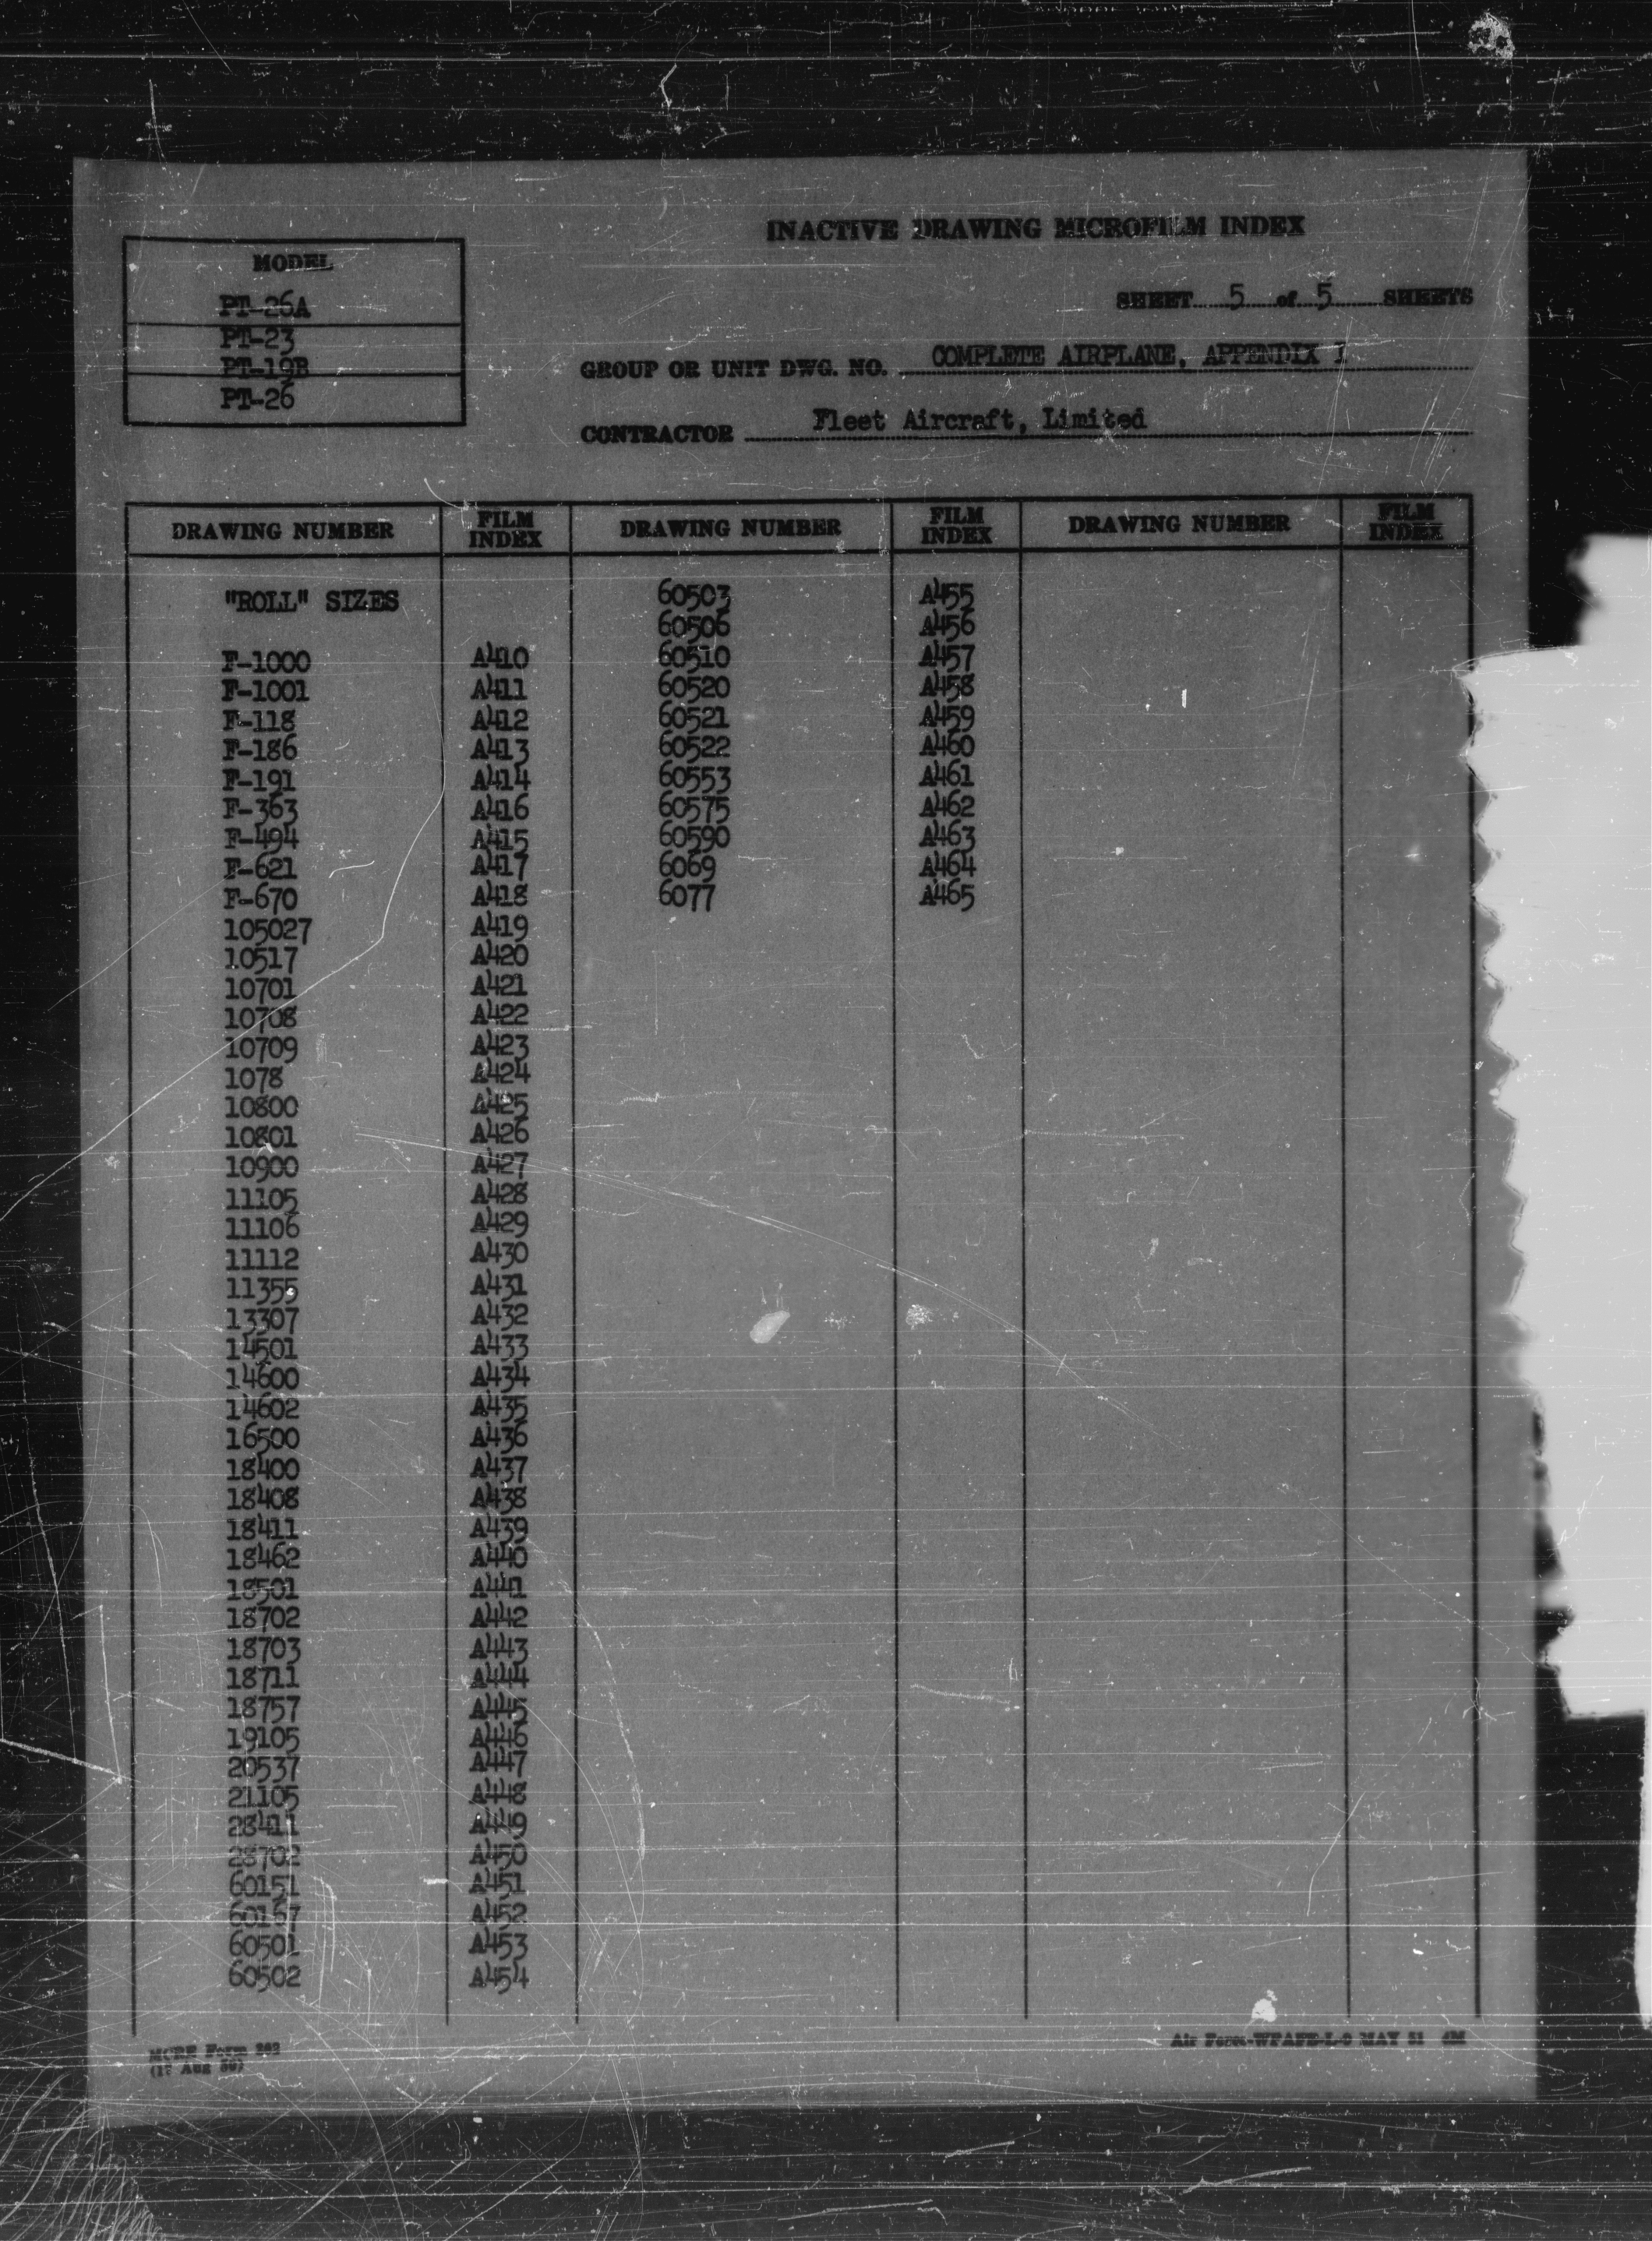 Sample page 7 from AirCorps Library document: Index of Drawings on Microfilm for PT-19B, PT-23, PT-26, and PT-26A